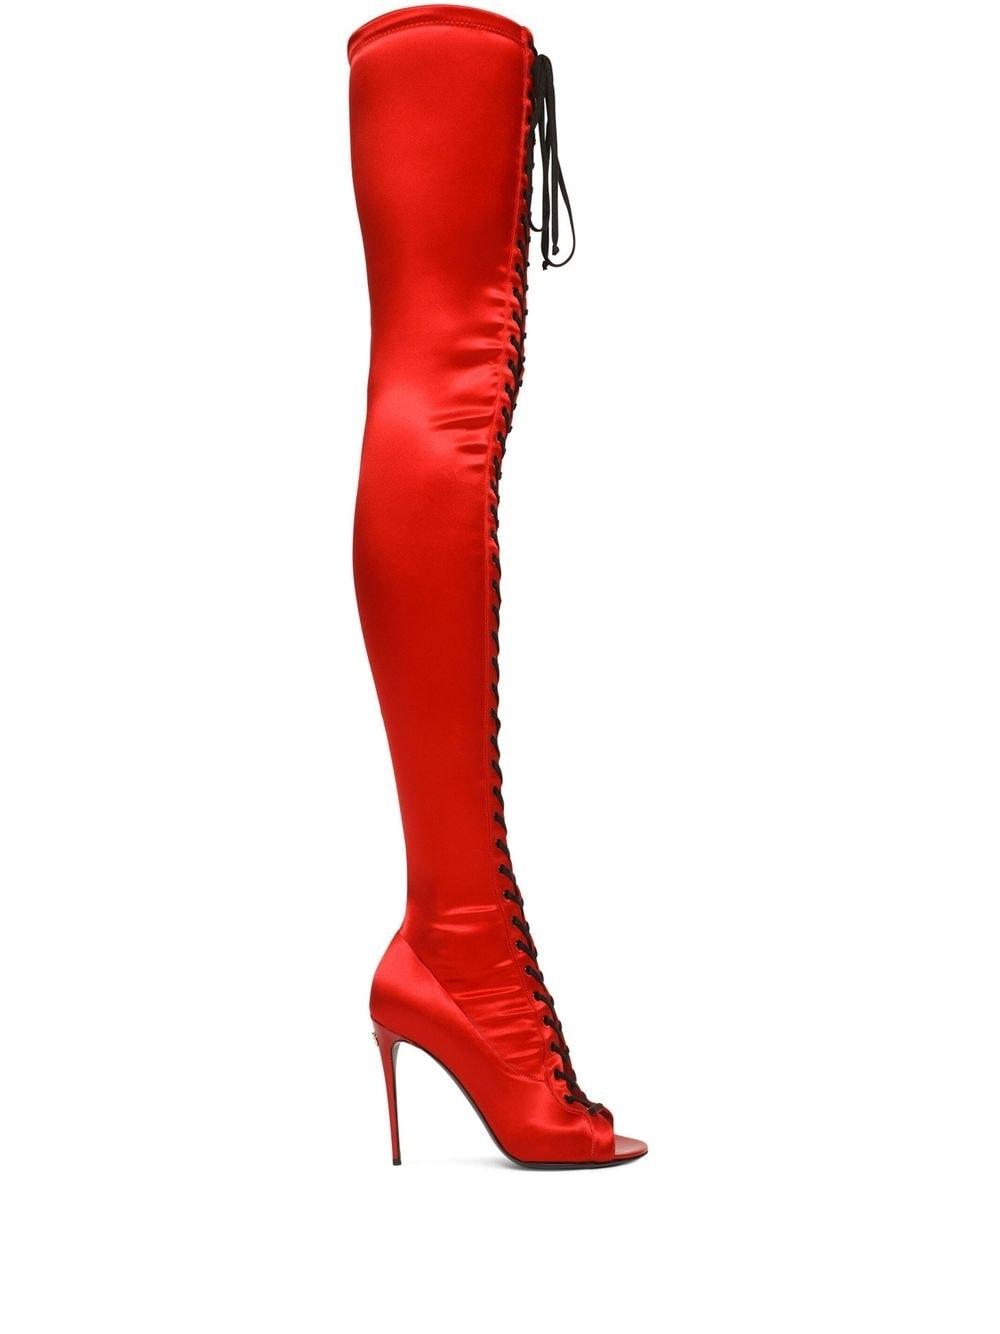 Dolce & Gabbana Lace-up Thigh-high Boots in Red | Lyst